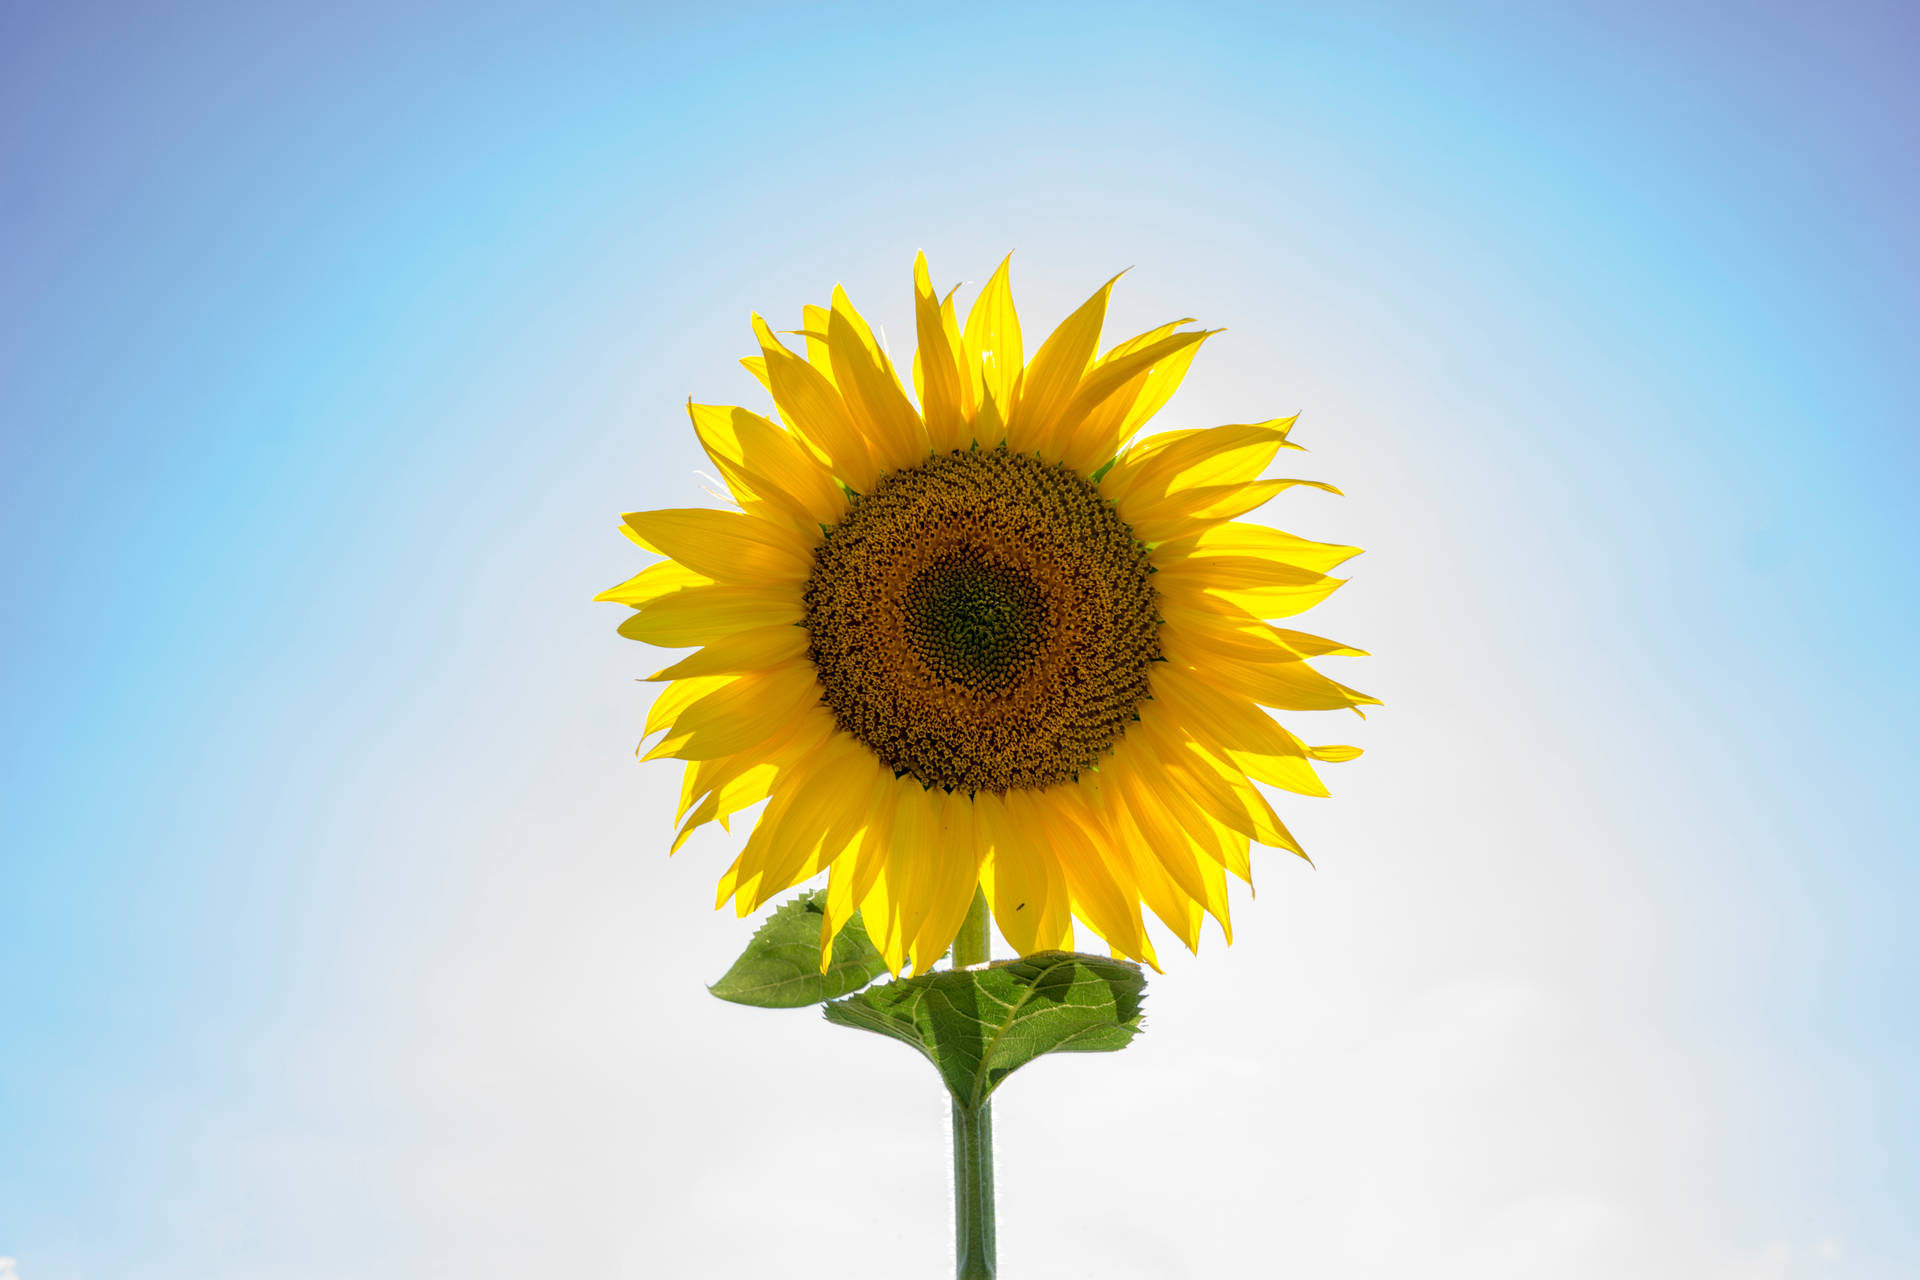 Giant Sunflower On A Sunny Day Background